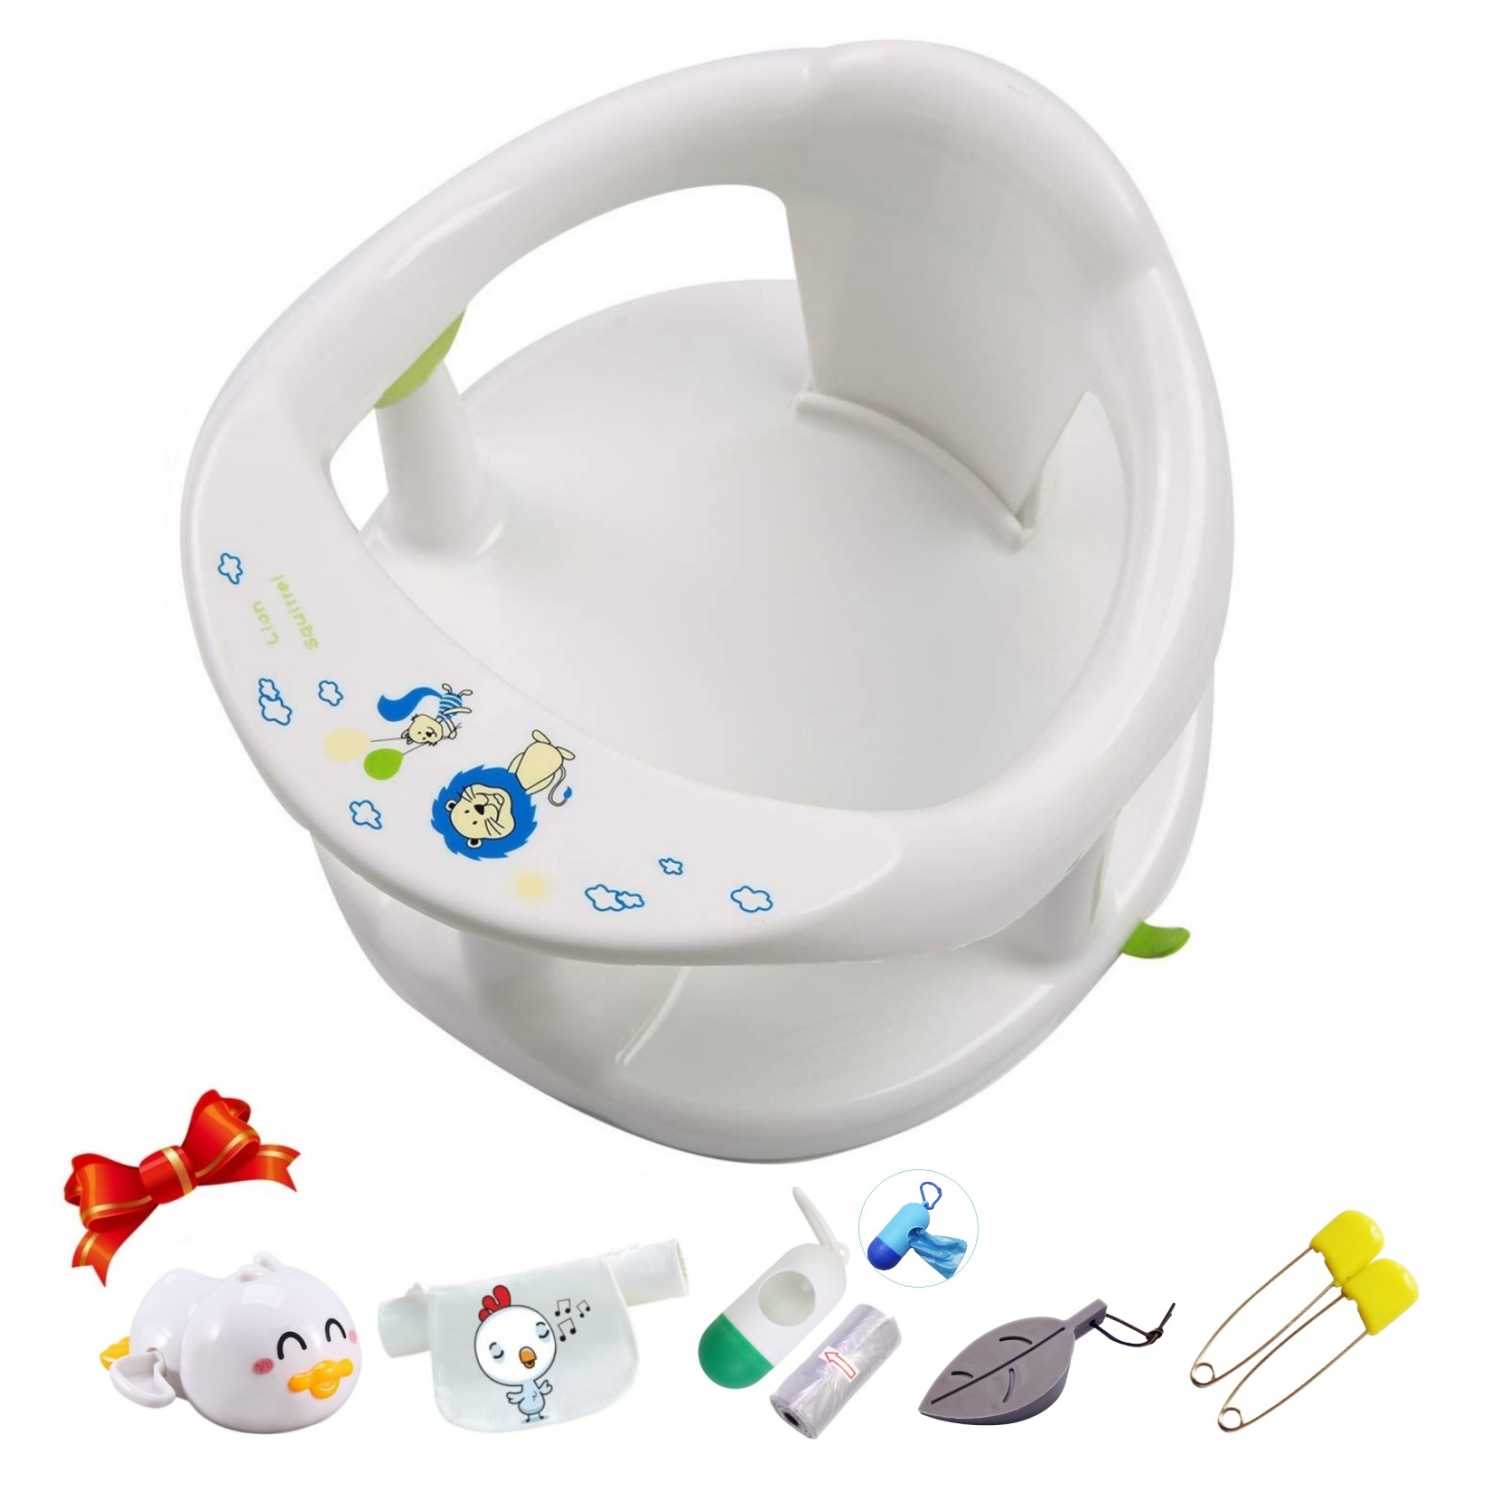 Baby Bathtub Seat for Baby Bath Essentials,Baby Bath Seat for Babies 6 Months & Up,Infant Bath Seat for Sitting Up in Tub, 8 in 1 Baby Bath Set - Value Baby Shower Gifts (White)